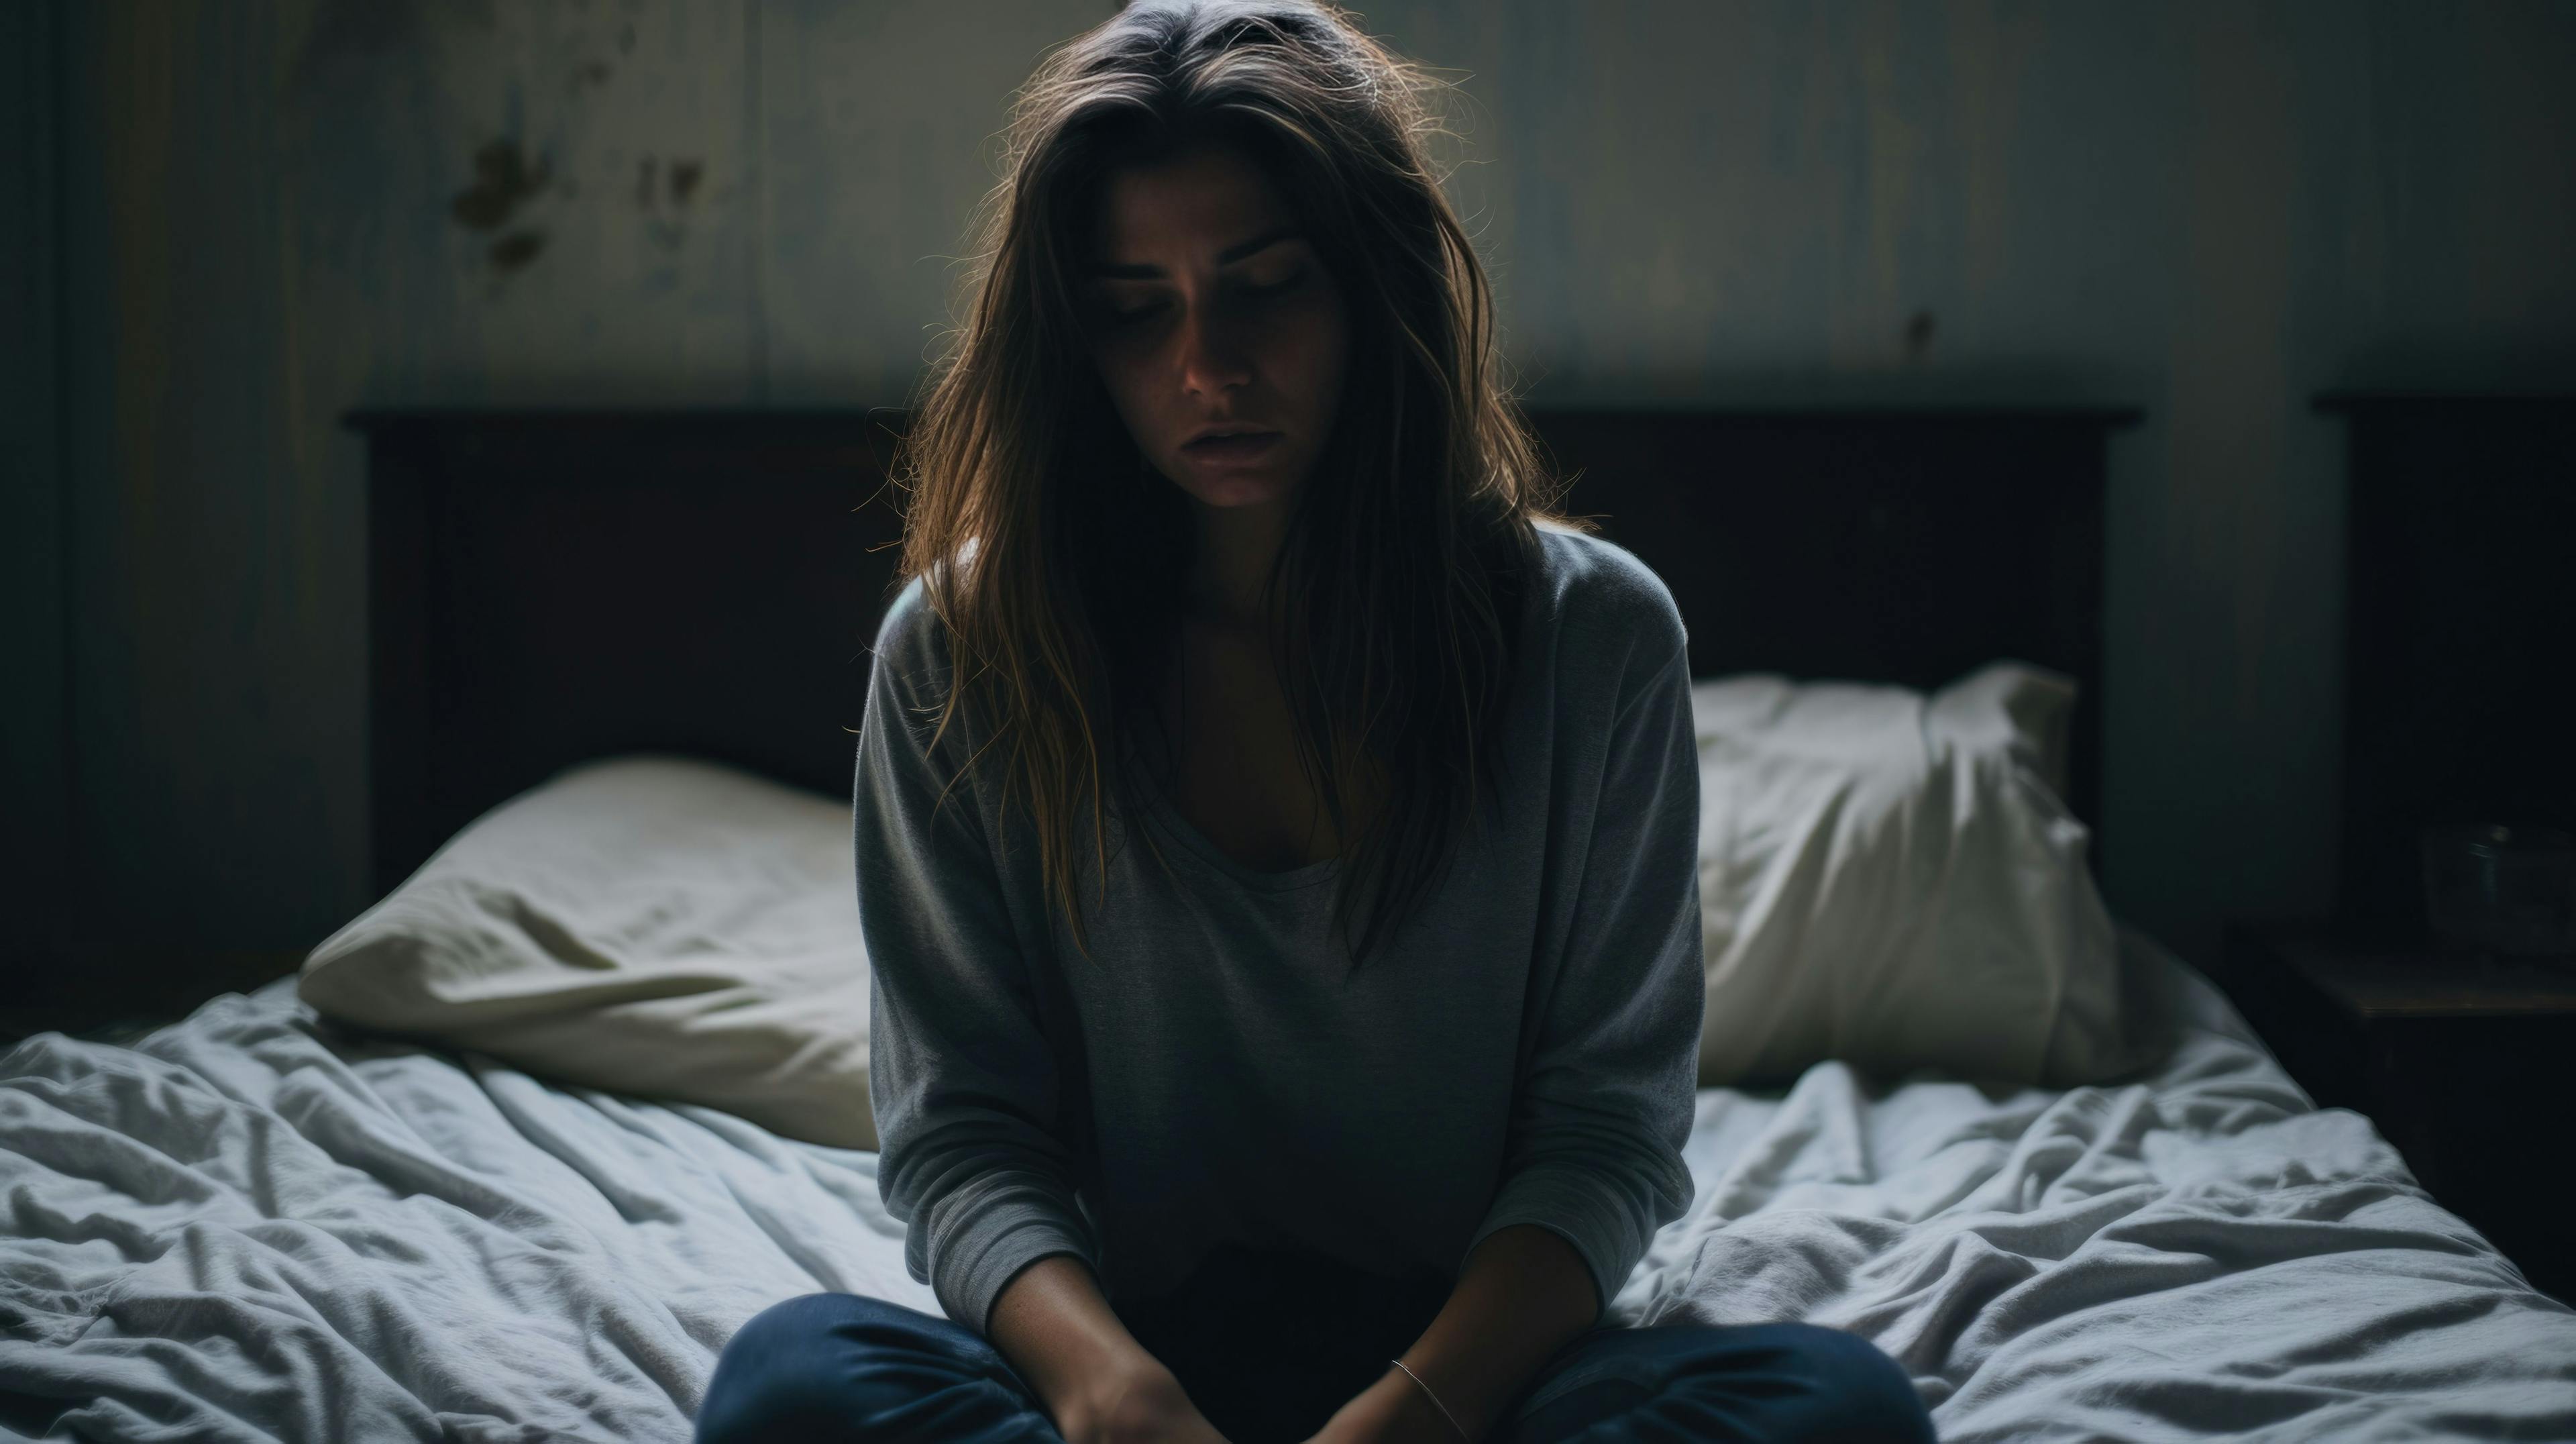 Woman Suffering From Depression Sitting On Bed In Pajamas - Image credit: MP Studio | stock.adobe.com